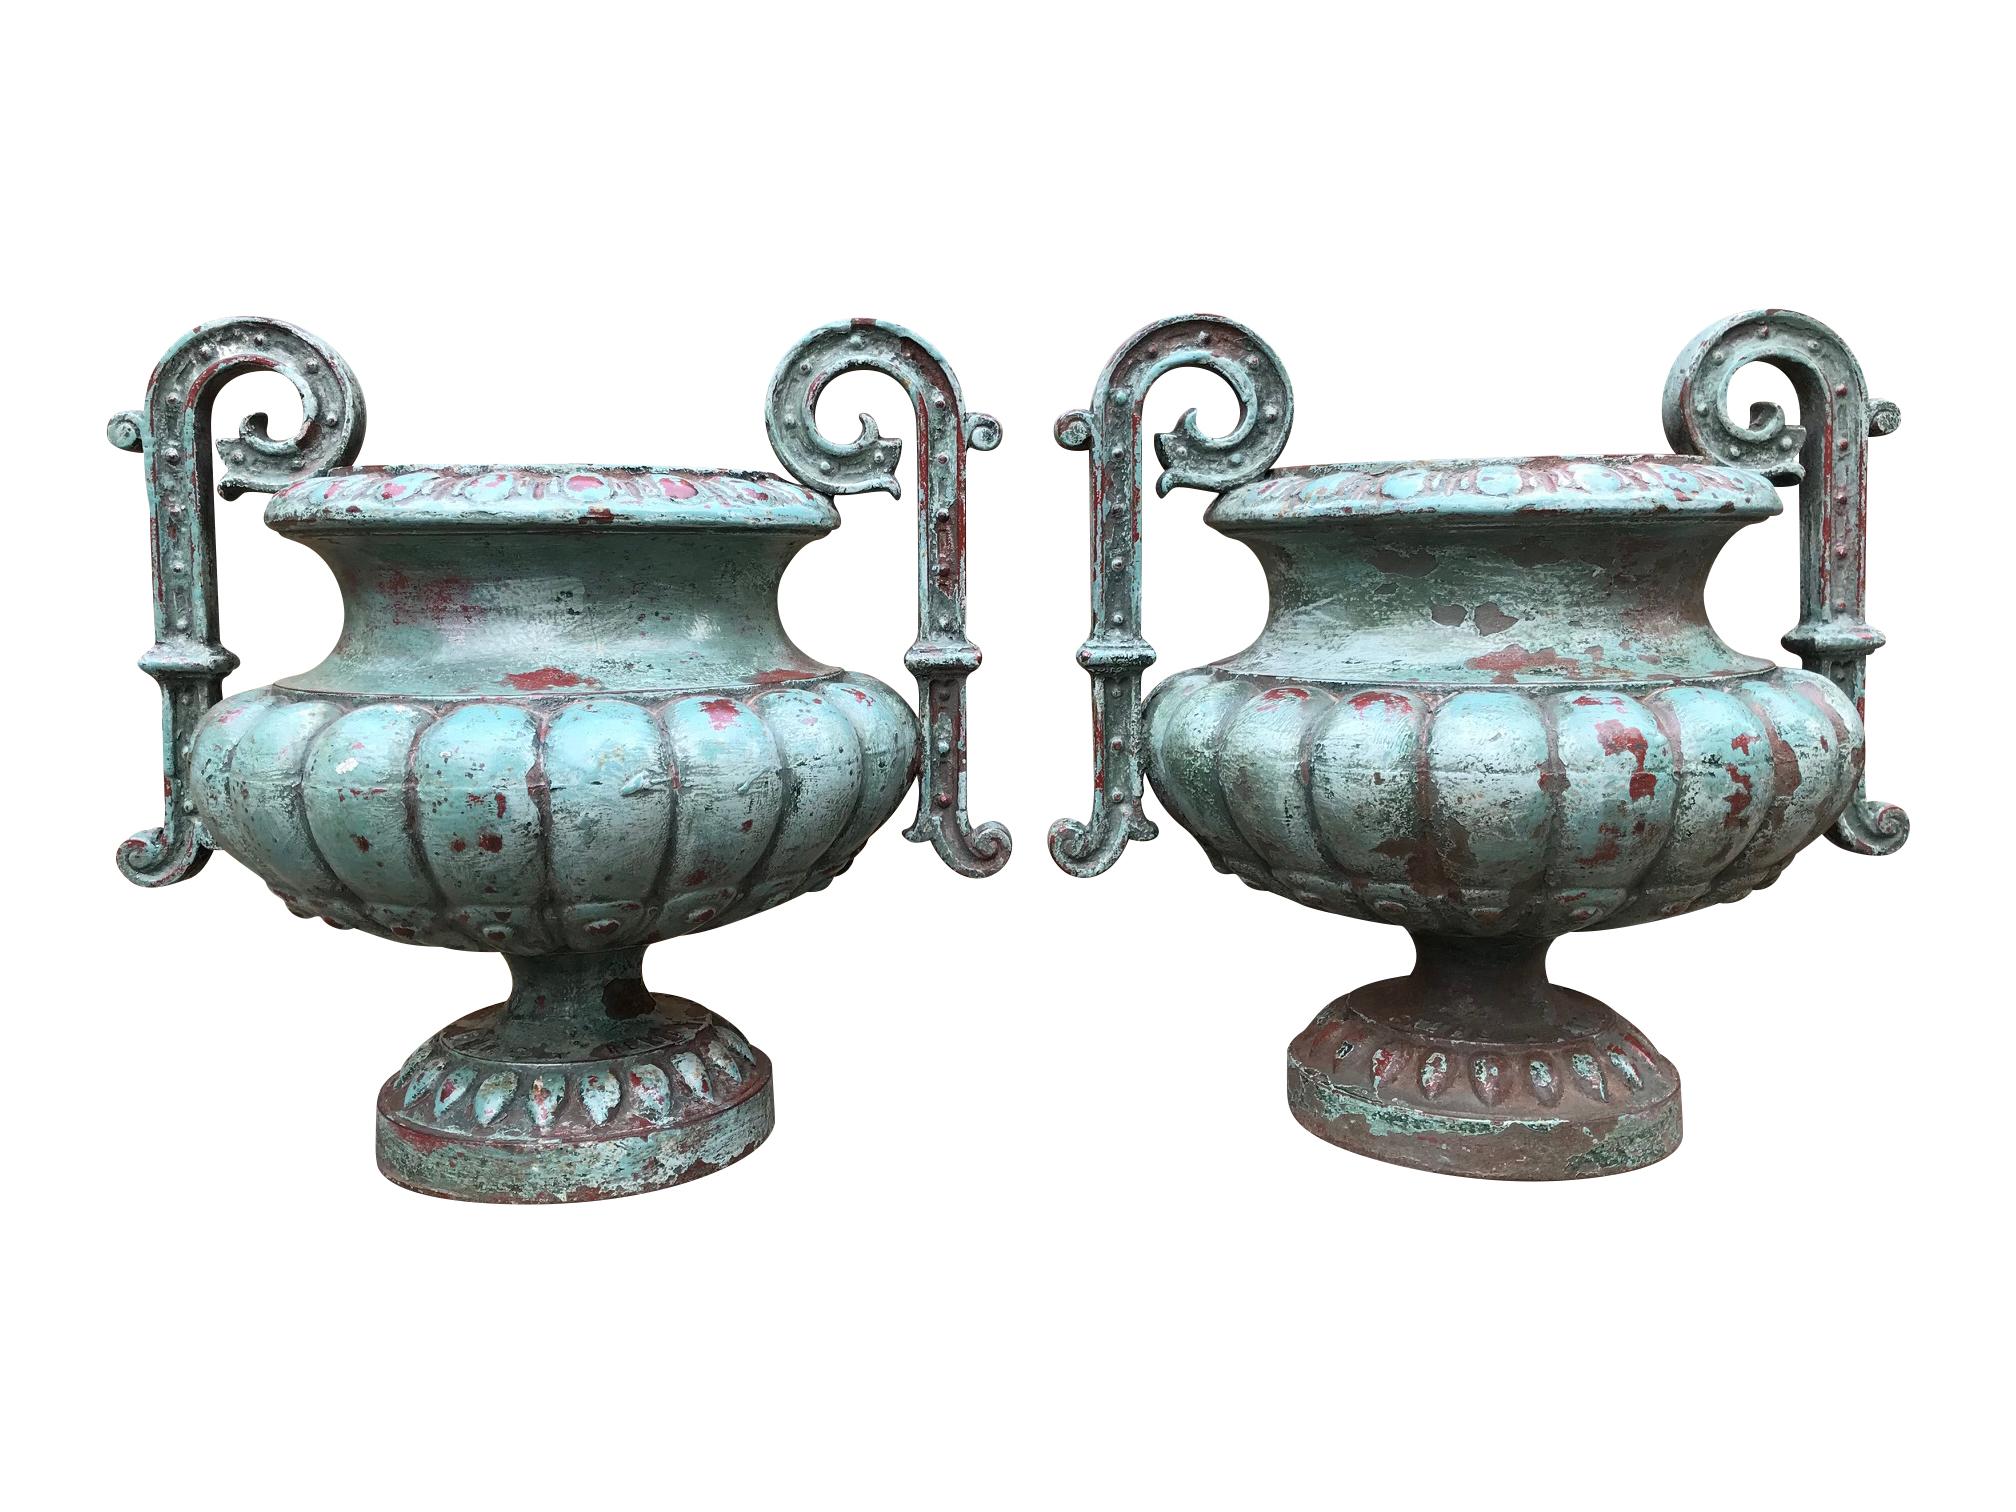 A rare pair of 19th century cast iron urns by Faure a Revin. Antoine Theodore Faure set up his foundry in 1854 in Revin in the French Alps

Famed for producing stoves, this unusual pair of urns are a rare sight. With layers of old paint with